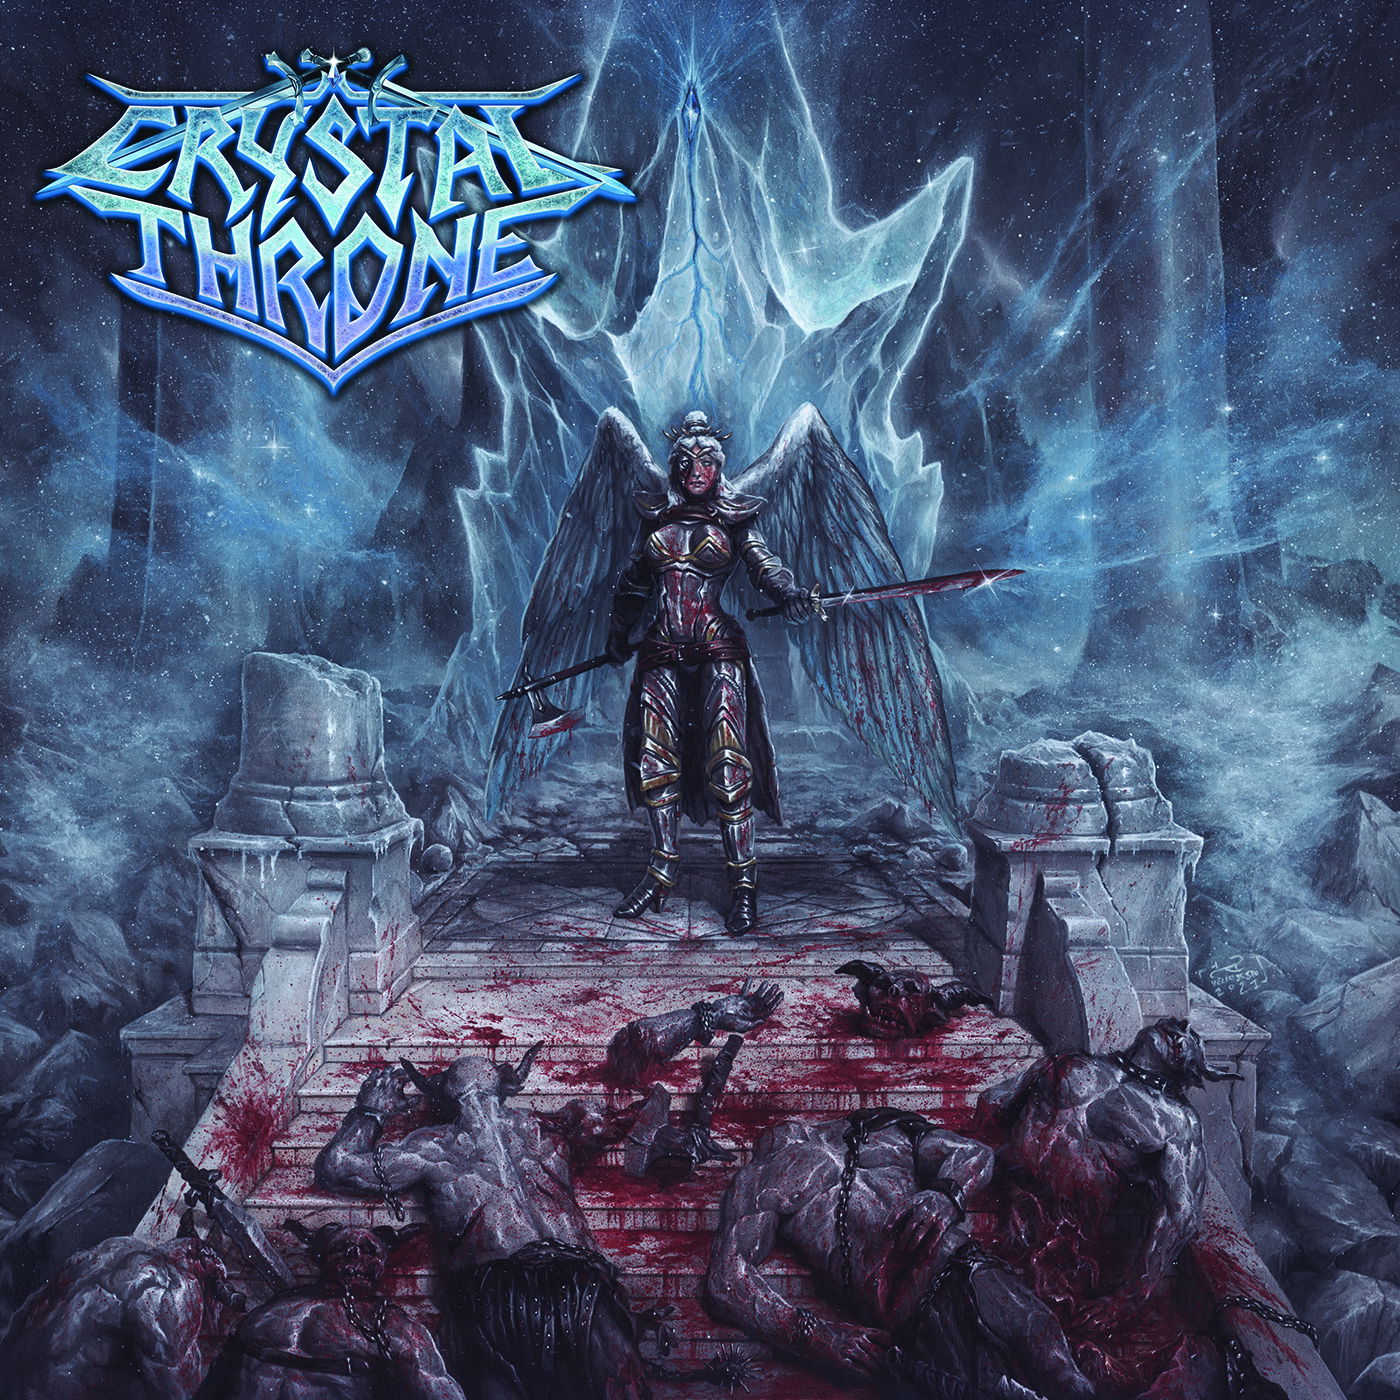 Interview with CRYSTAL THRONE